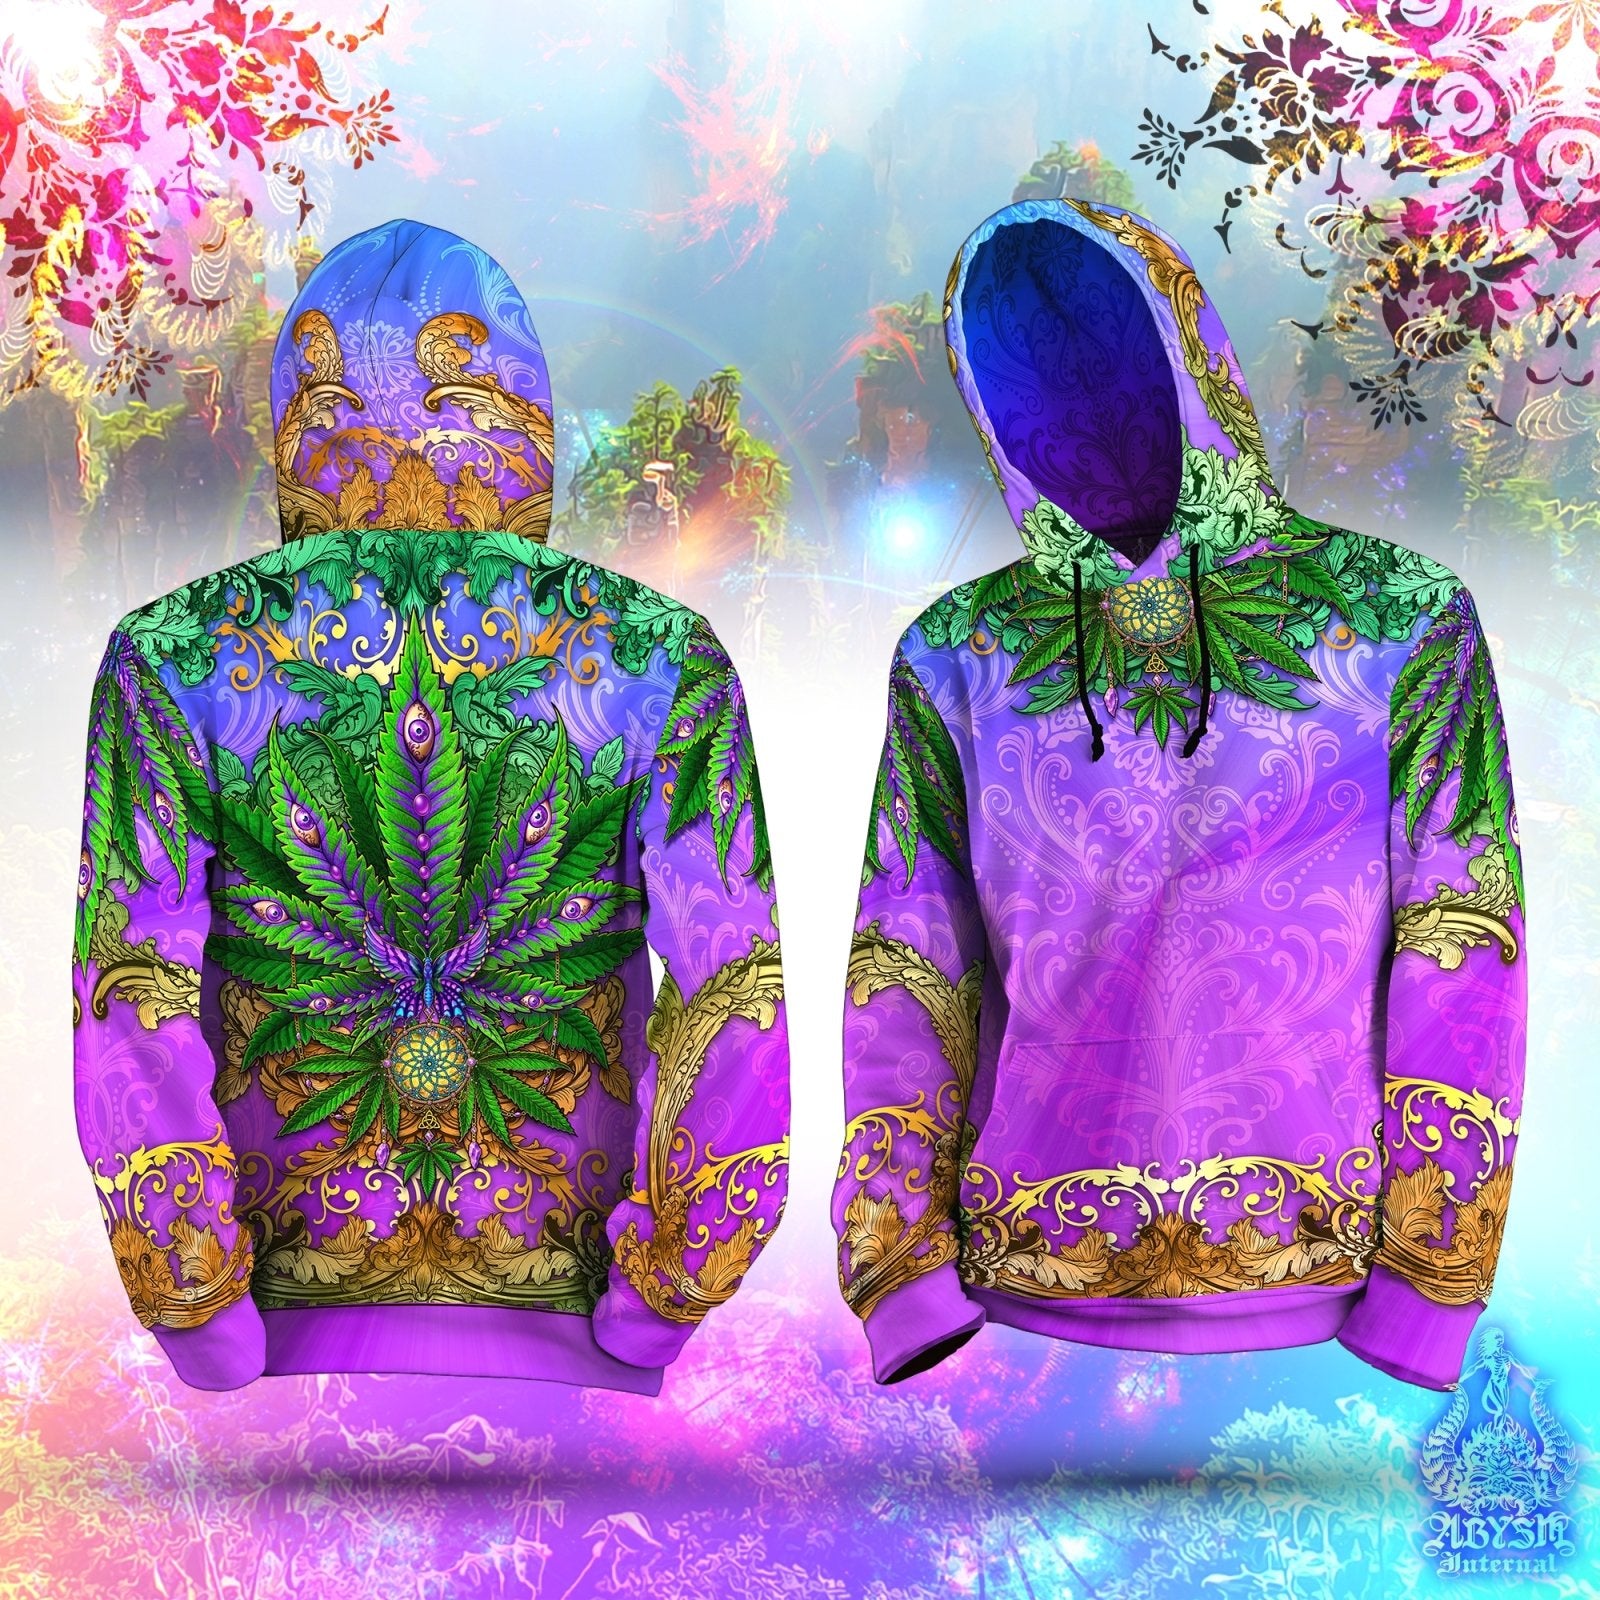 Cannabis Hoodie, Weed Festival Clothes, Trippy Outfit, Hippie Streetwear, Indie and Alternative Clothing, Unisex, 420 Gift - Marijuana, Nature, Green and Purple - Abysm Internal